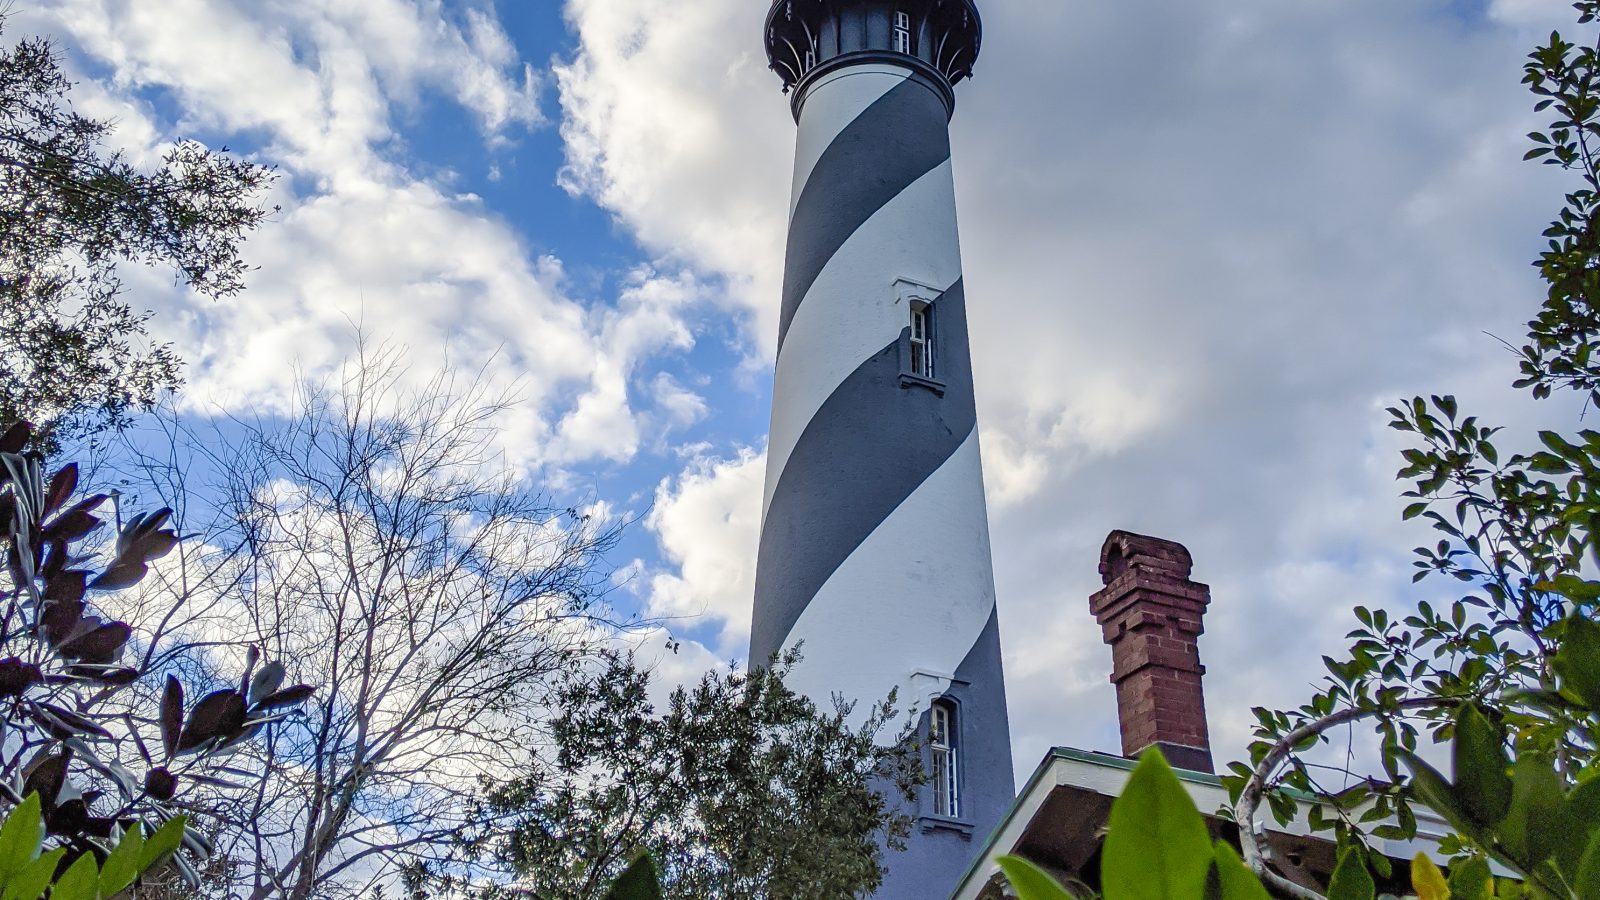 WWII Sites in St. Augustine, Florida - America's Oldest City | Flagler College, Castillo de San Marcos, World War II memorial, St. Augustine Lighthouse and Maritime Museum, Tin Pickle eatery #staugustine #ancientcity #florida #wwiitravel #destinationwwii #worldwarii